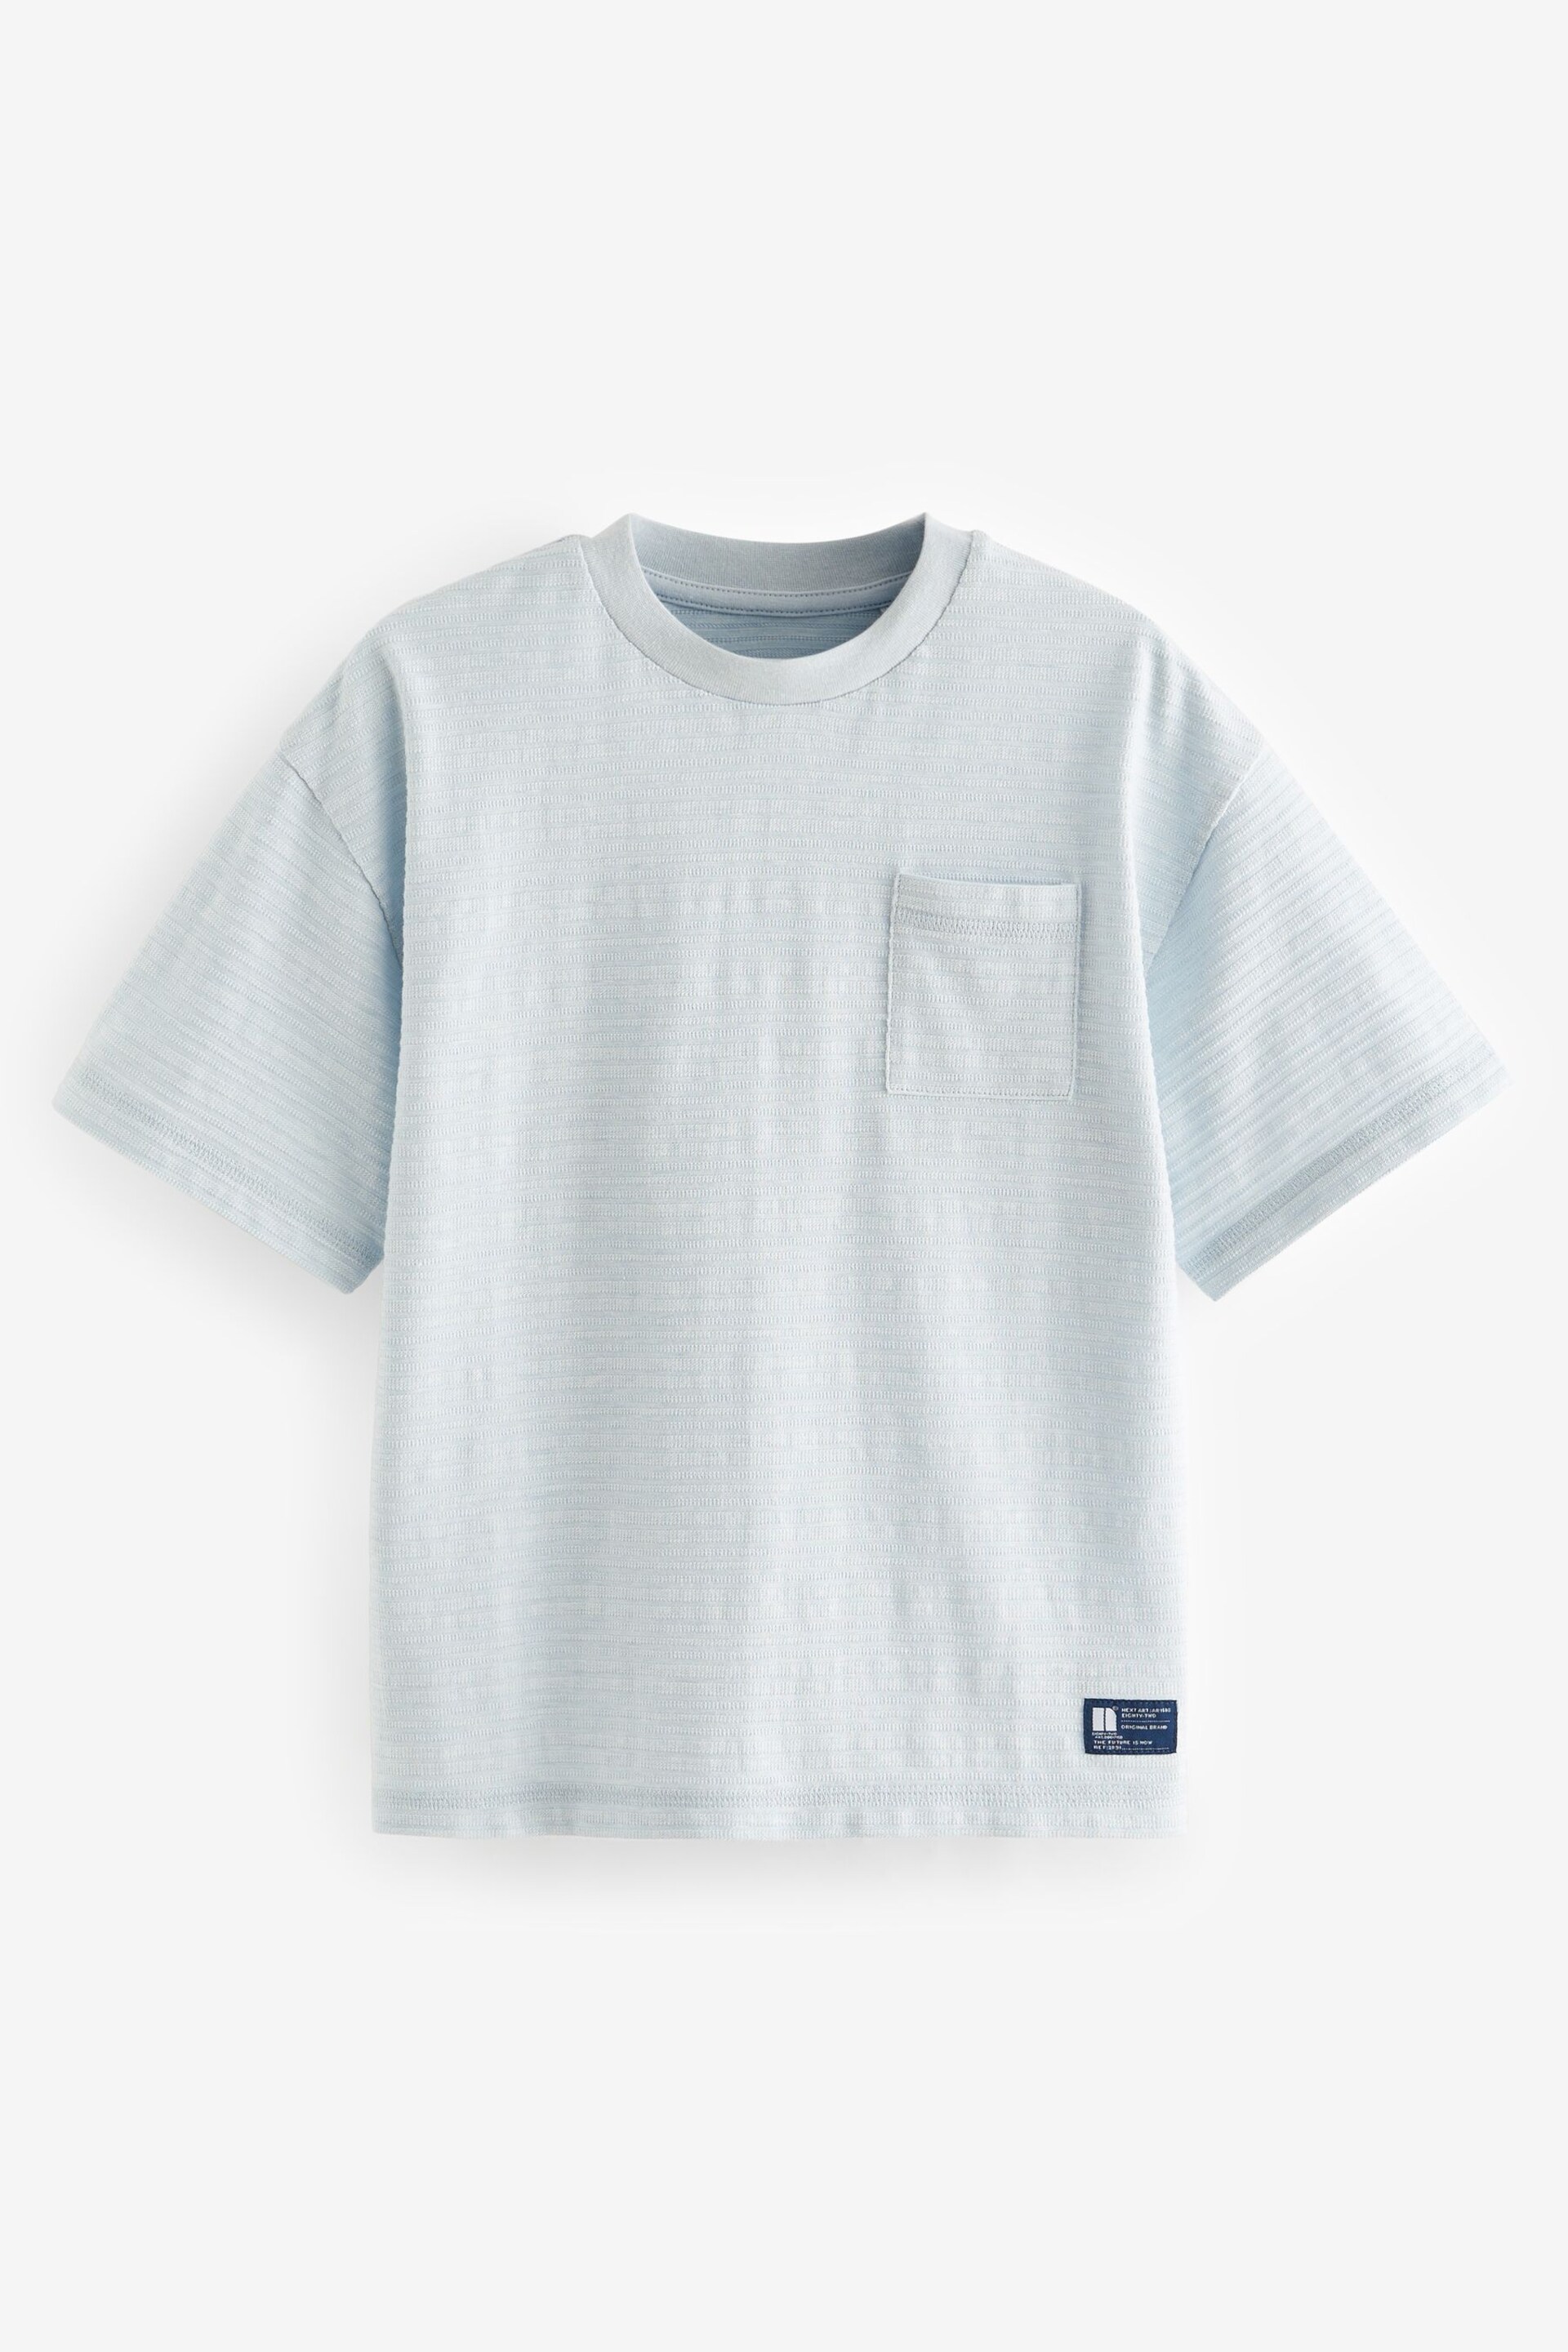 Blue Texture Relax Fit Textured T-Shirt (3-16yrs) - Image 1 of 3